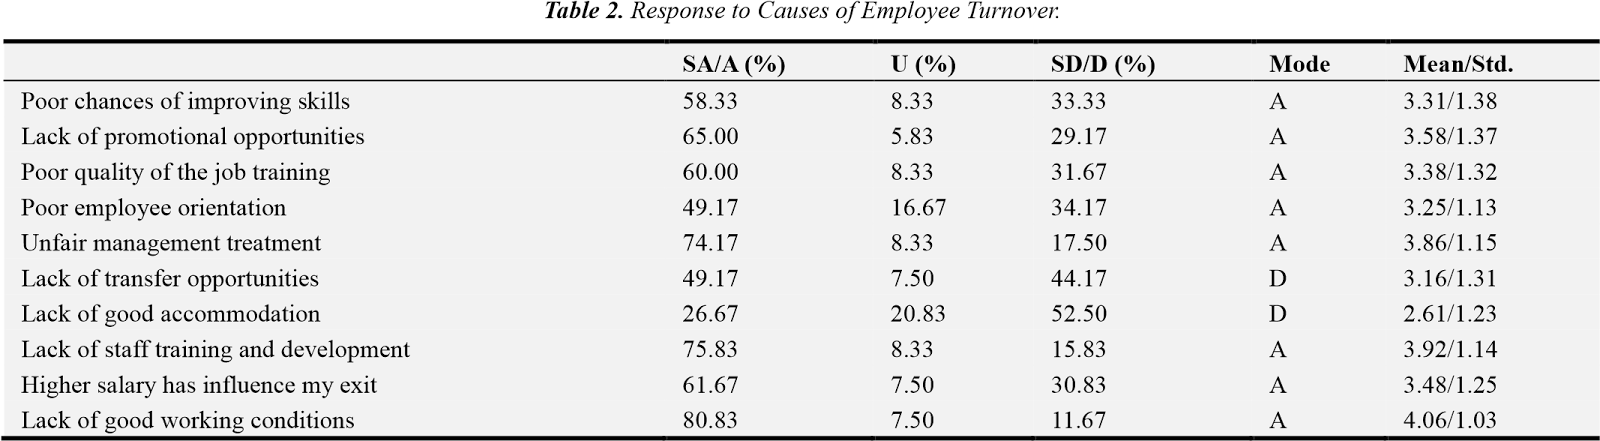 Table of response to causes of employee turnover